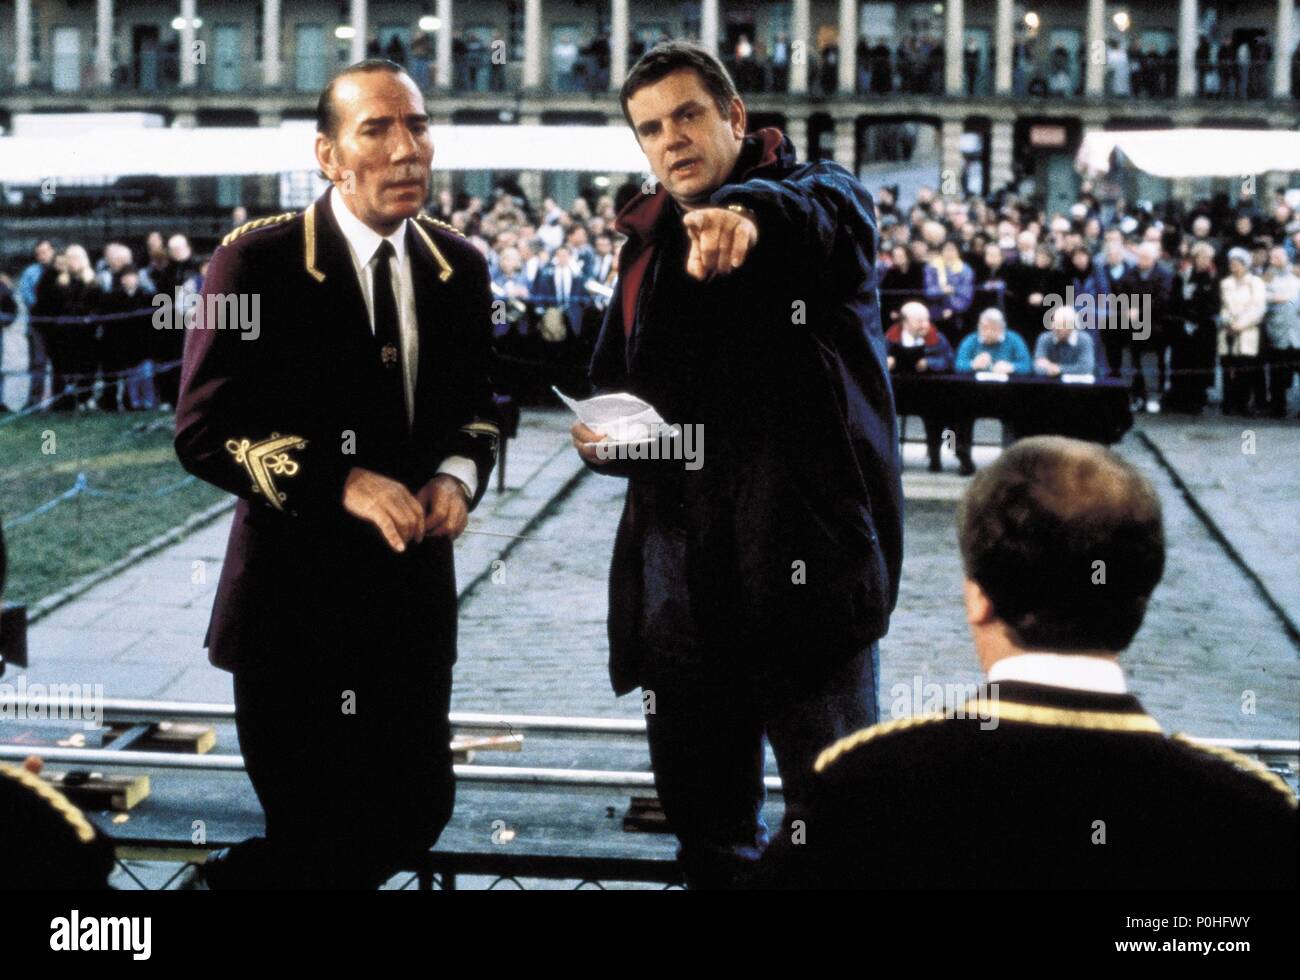 Original Film Title: BRASSED OFF.  English Title: BRASSED OFF.  Film Director: MARK HERMAN.  Year: 1996.  Stars: PETE POSTLETHWAITE. Copyright: Editorial inside use only. This is a publicly distributed handout. Access rights only, no license of copyright provided. Mandatory authorization to Visual Icon (www.visual-icon.com) is required for the reproduction of this image. Credit: MIRAMAX / Album Stock Photo